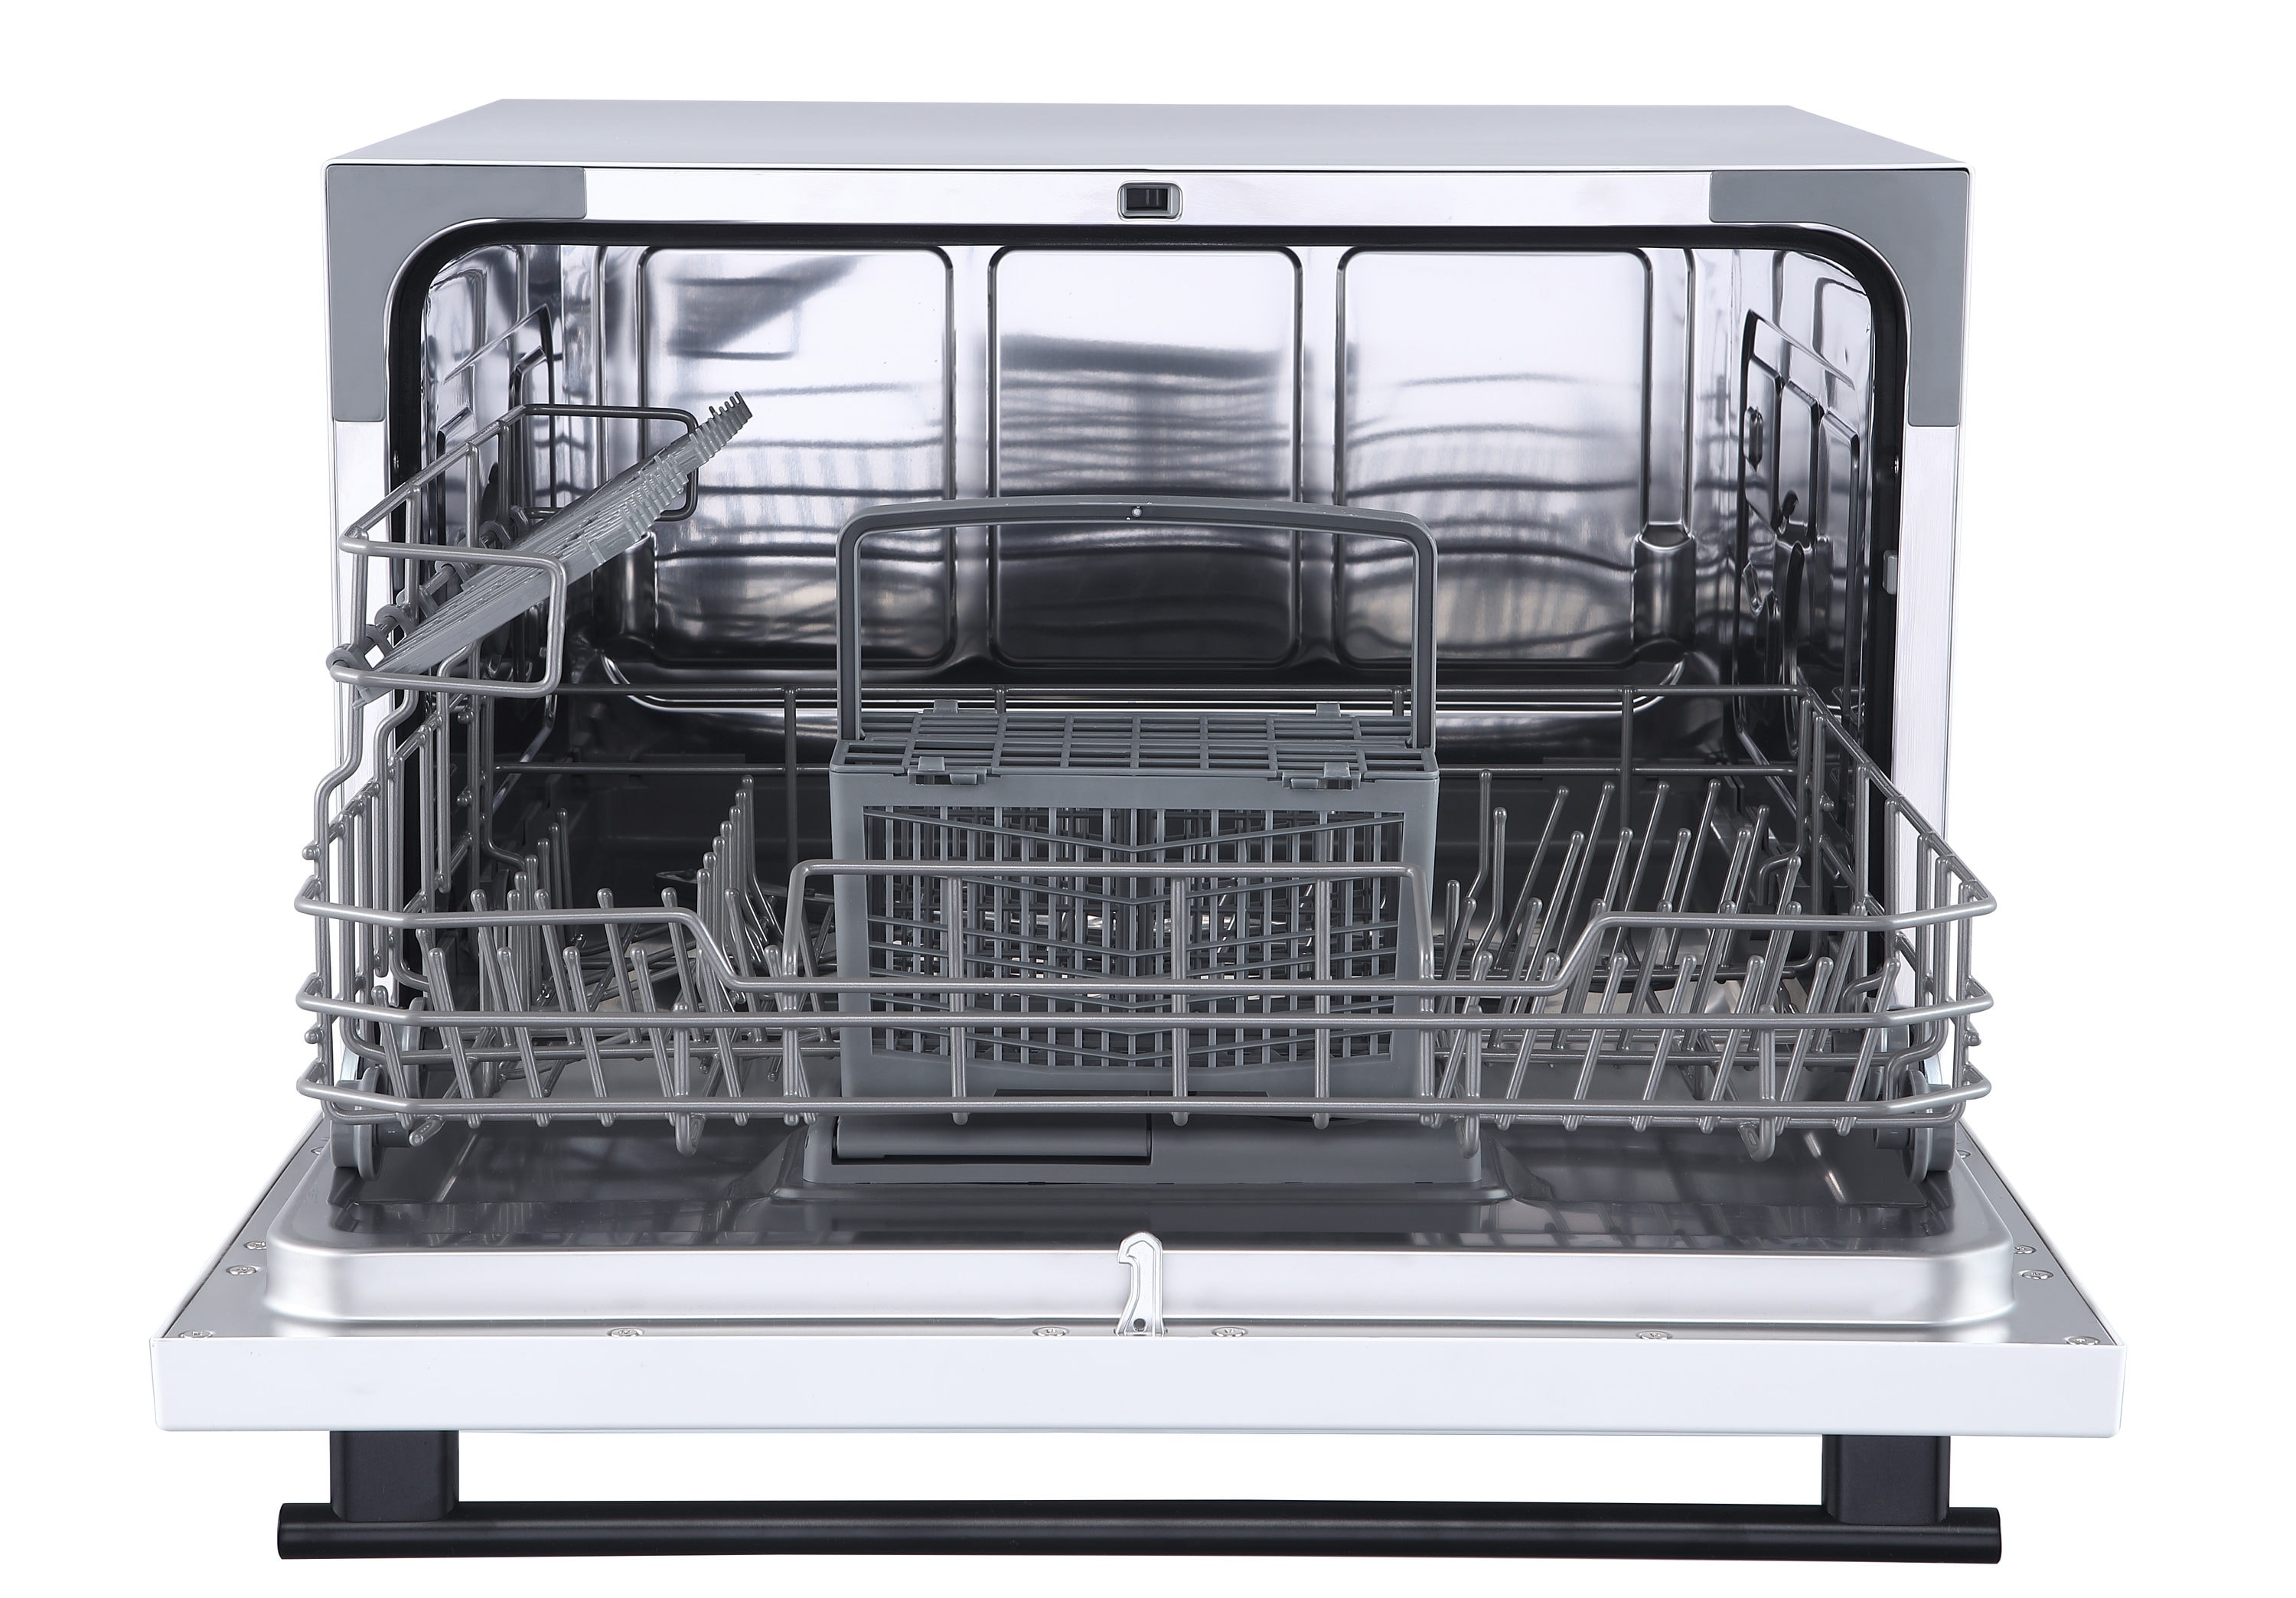 Farberware Complete 18 in. White Portable Countertop Dishwasher with UV  Light, 5 Wash Programs, Glass Door FCDMGDWH - The Home Depot